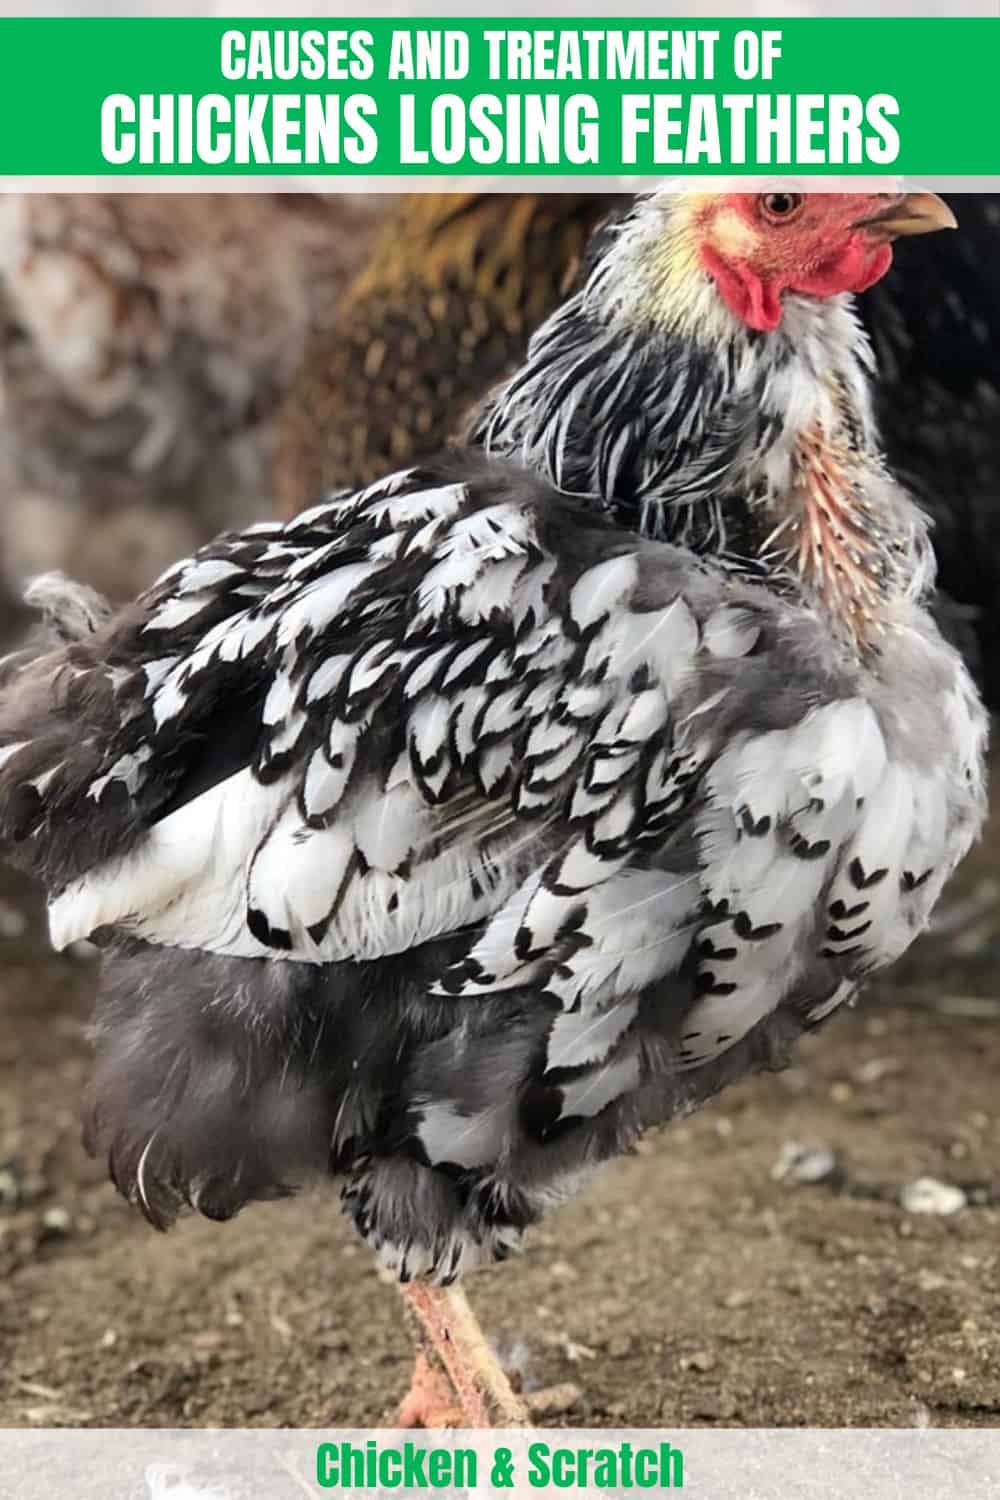 chickens losing feathers